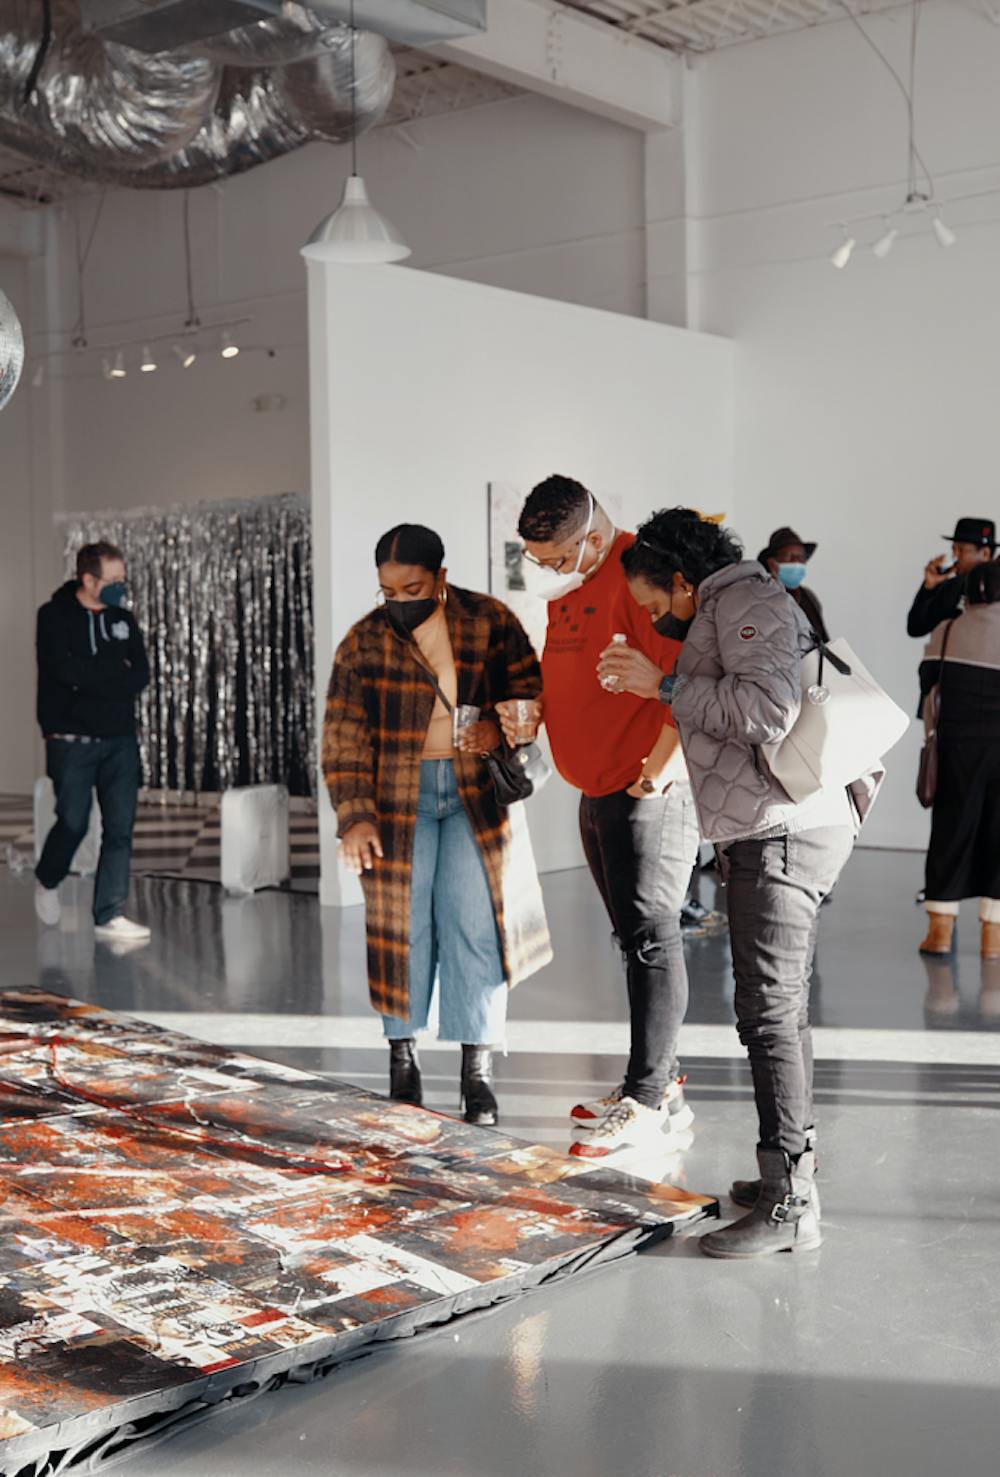 <p>TONE displays art, primarily for Black Memphians and midsoutherners. The space helps Black artists display their art, which some find difficult.</p>